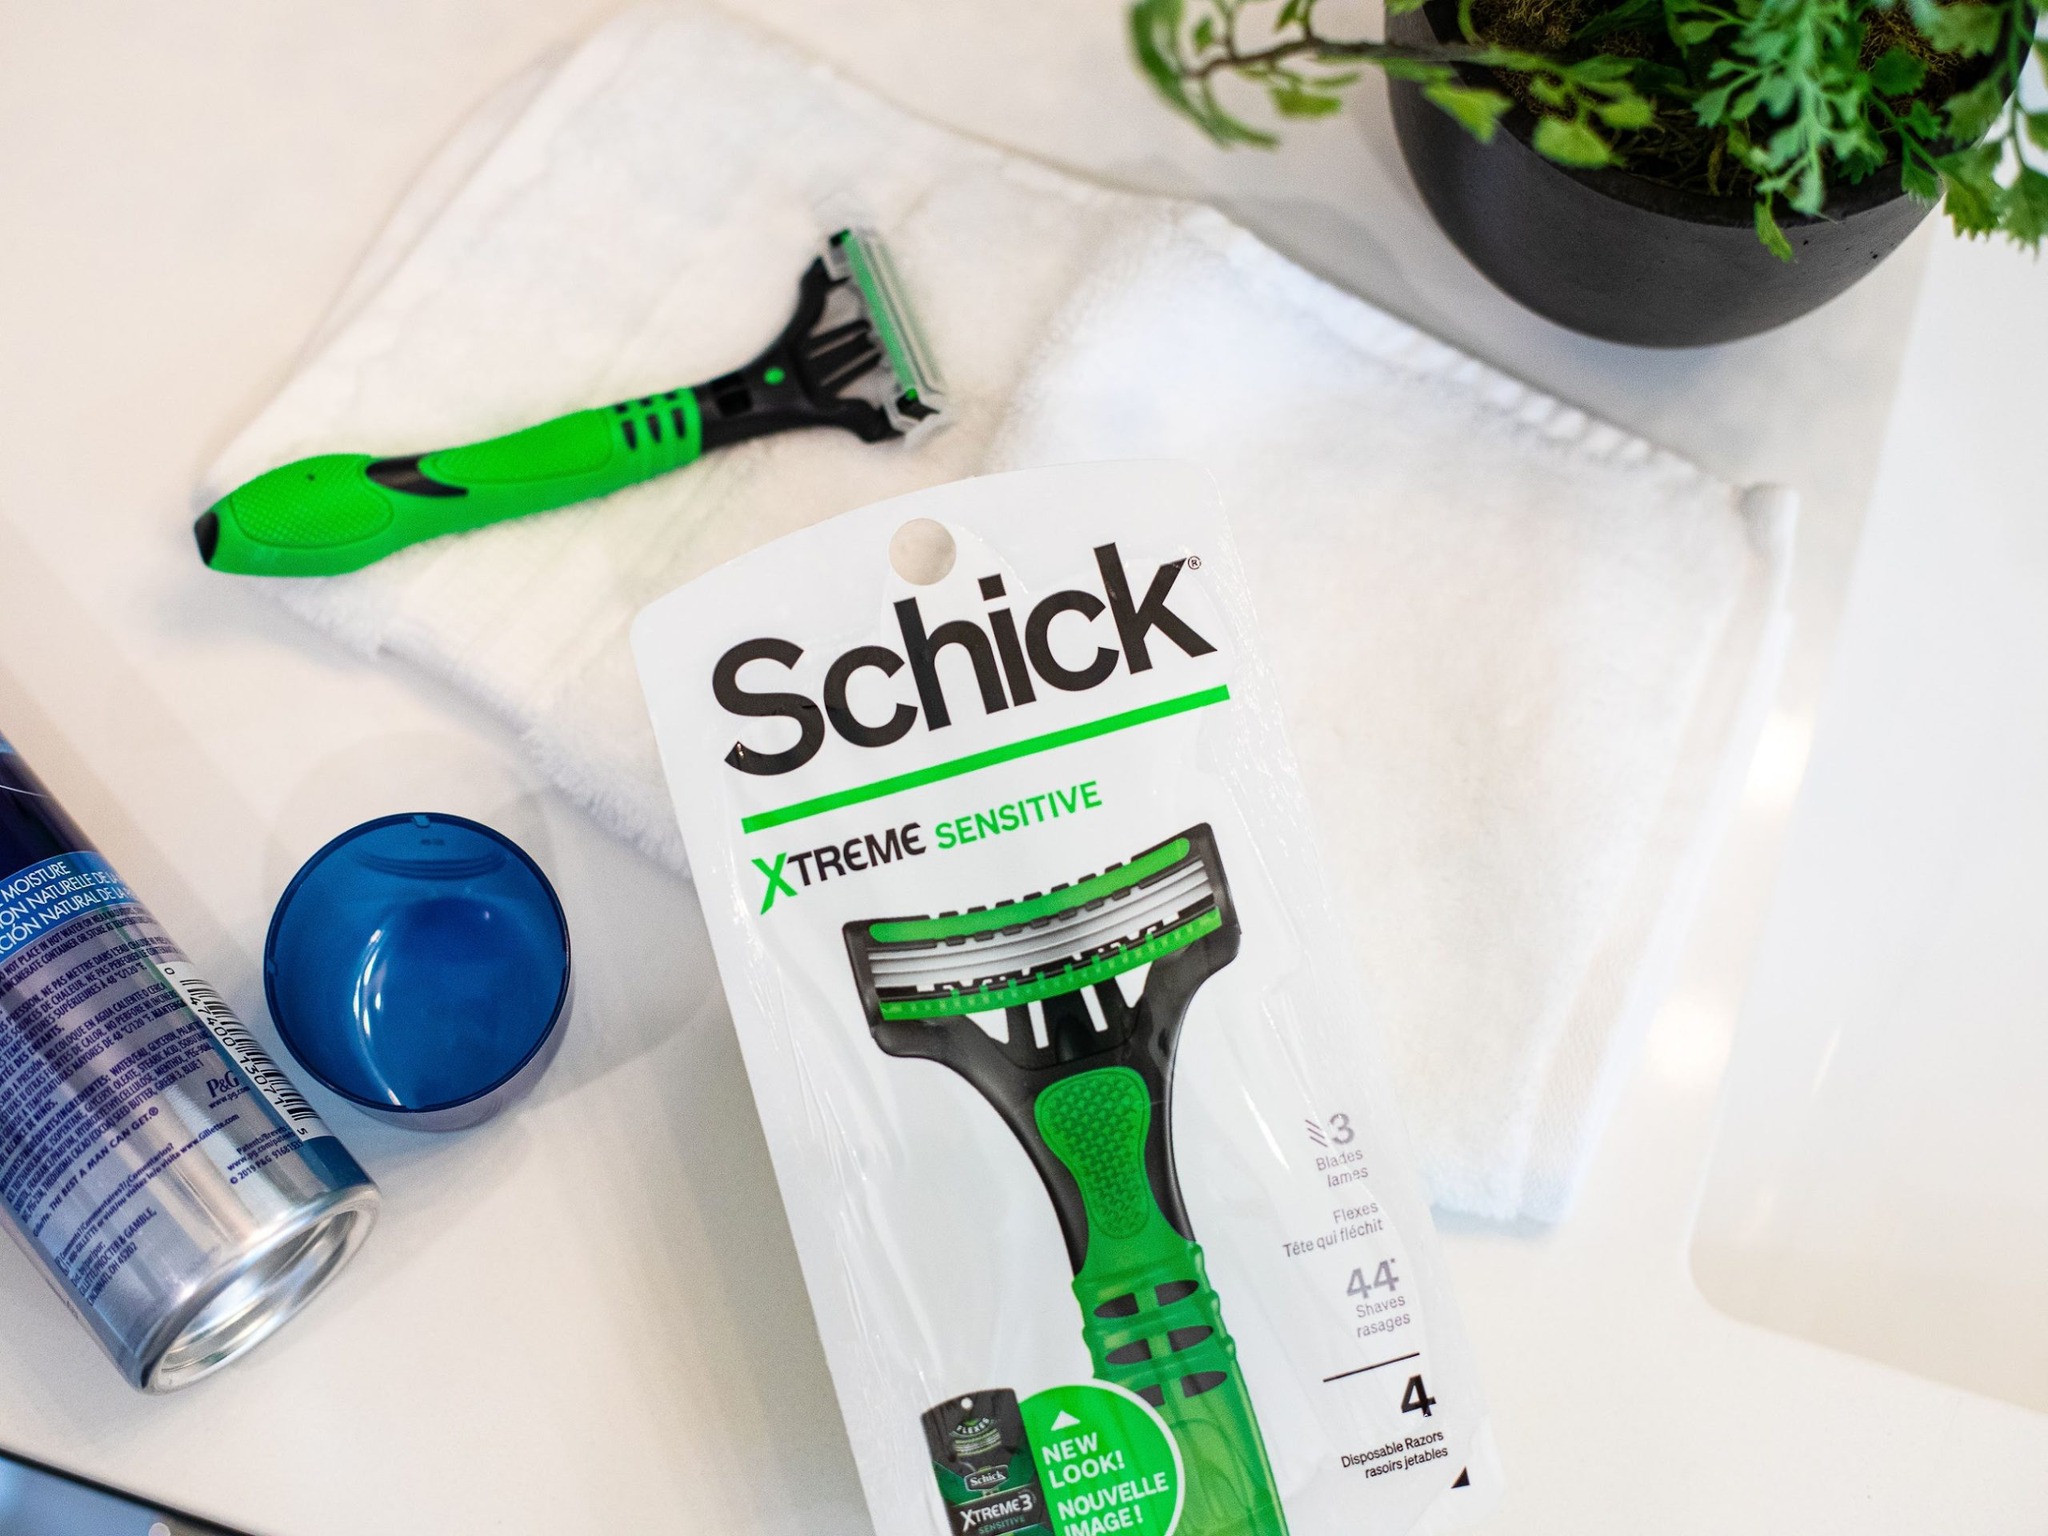 Schick Disposable Razors As Low As $1.99 At Kroger